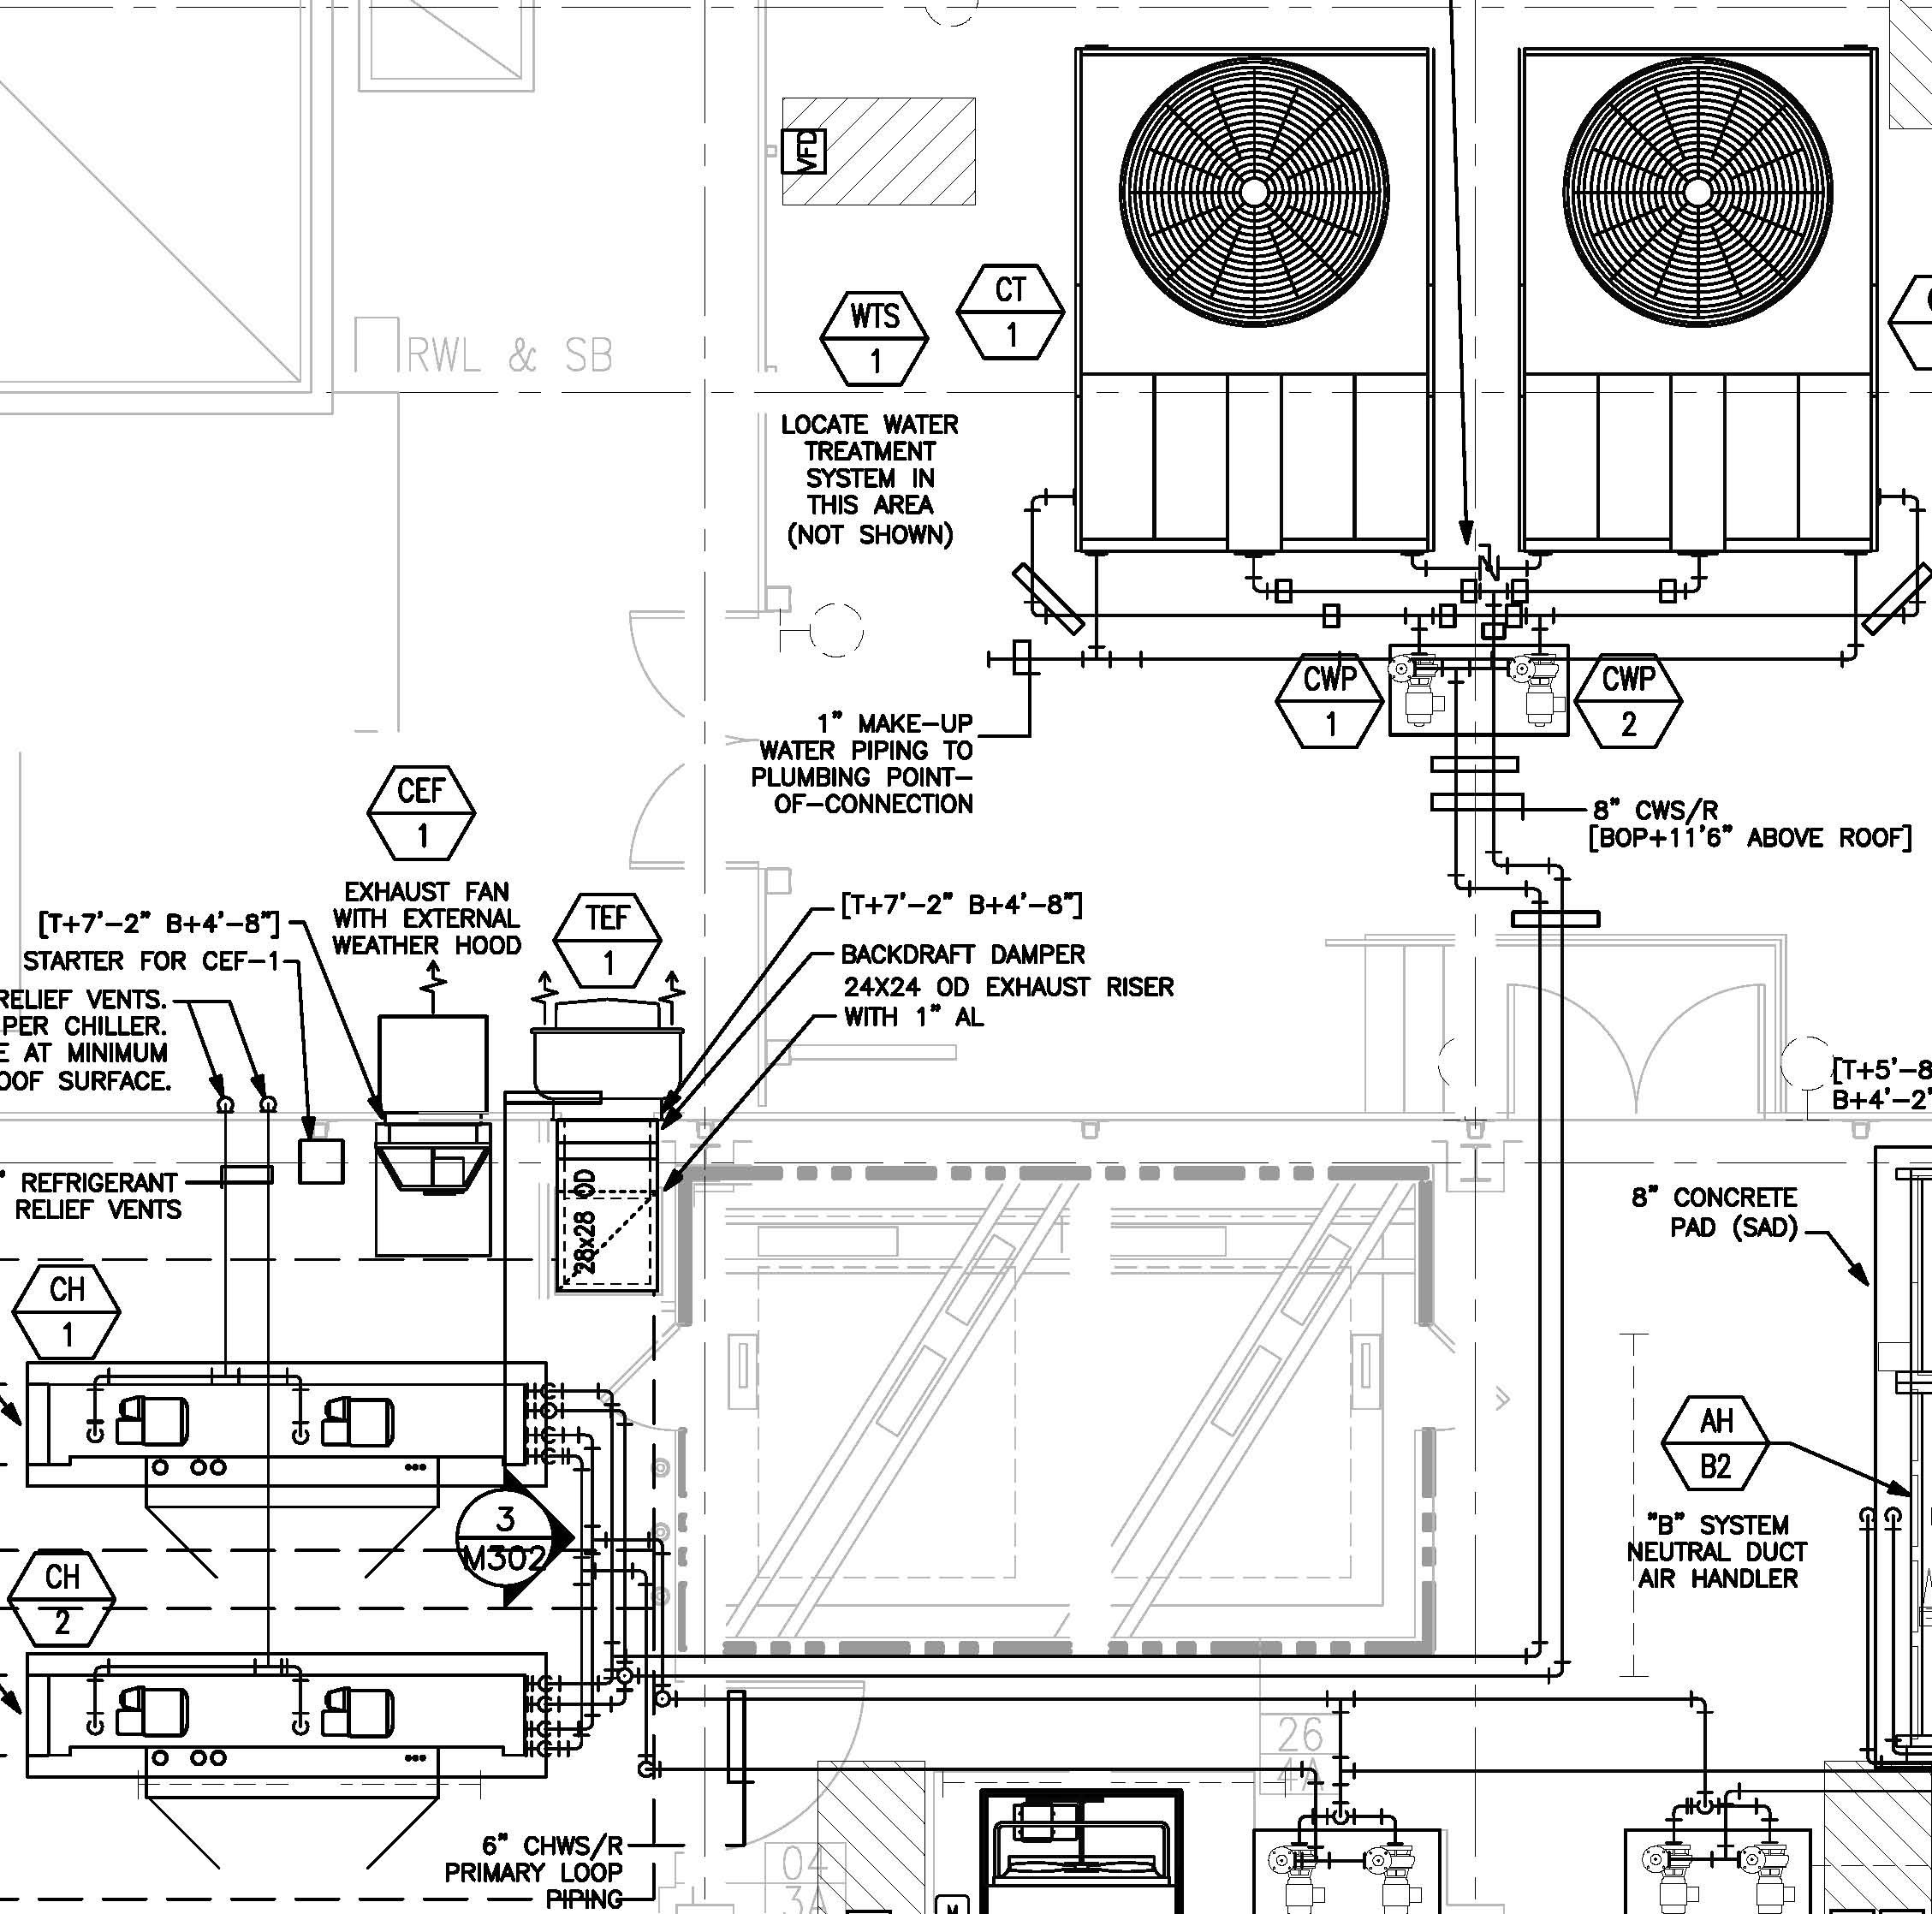 norlake walk in cooler wiring diagram Download Walk In Cooler Troubleshooting Chart Lovely System Diagrams DOWNLOAD Wiring Diagram